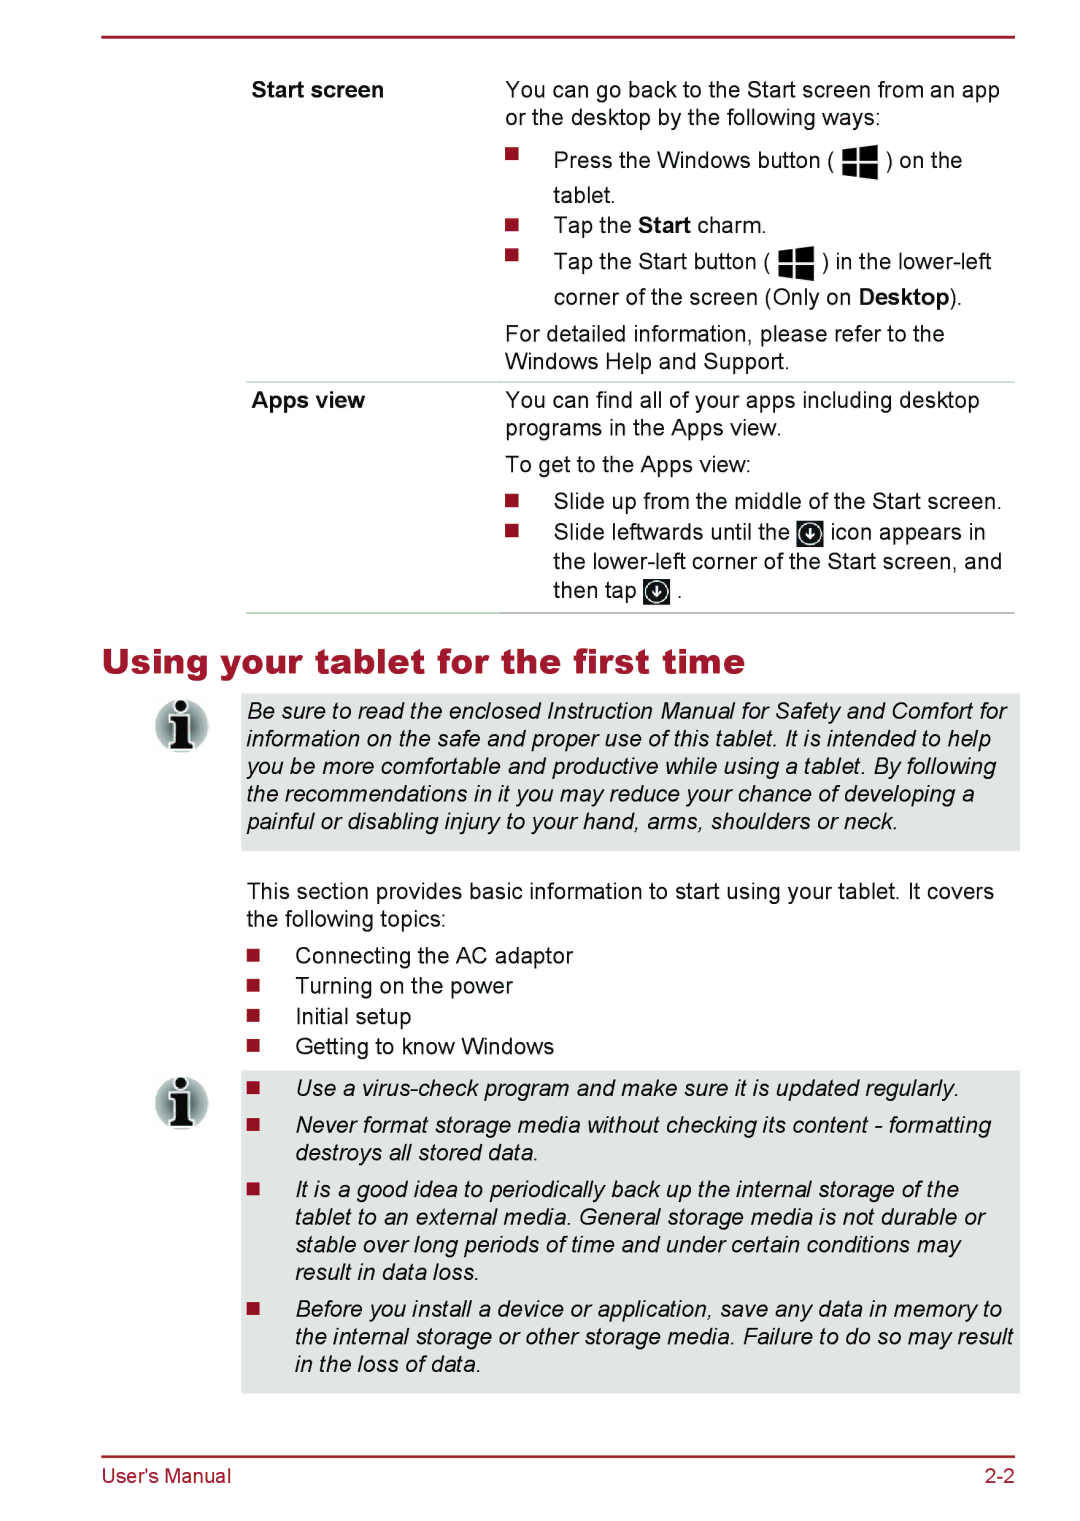 Toshiba WT8-A Series user manual Using your tablet for the first time, Start screen, Apps view 